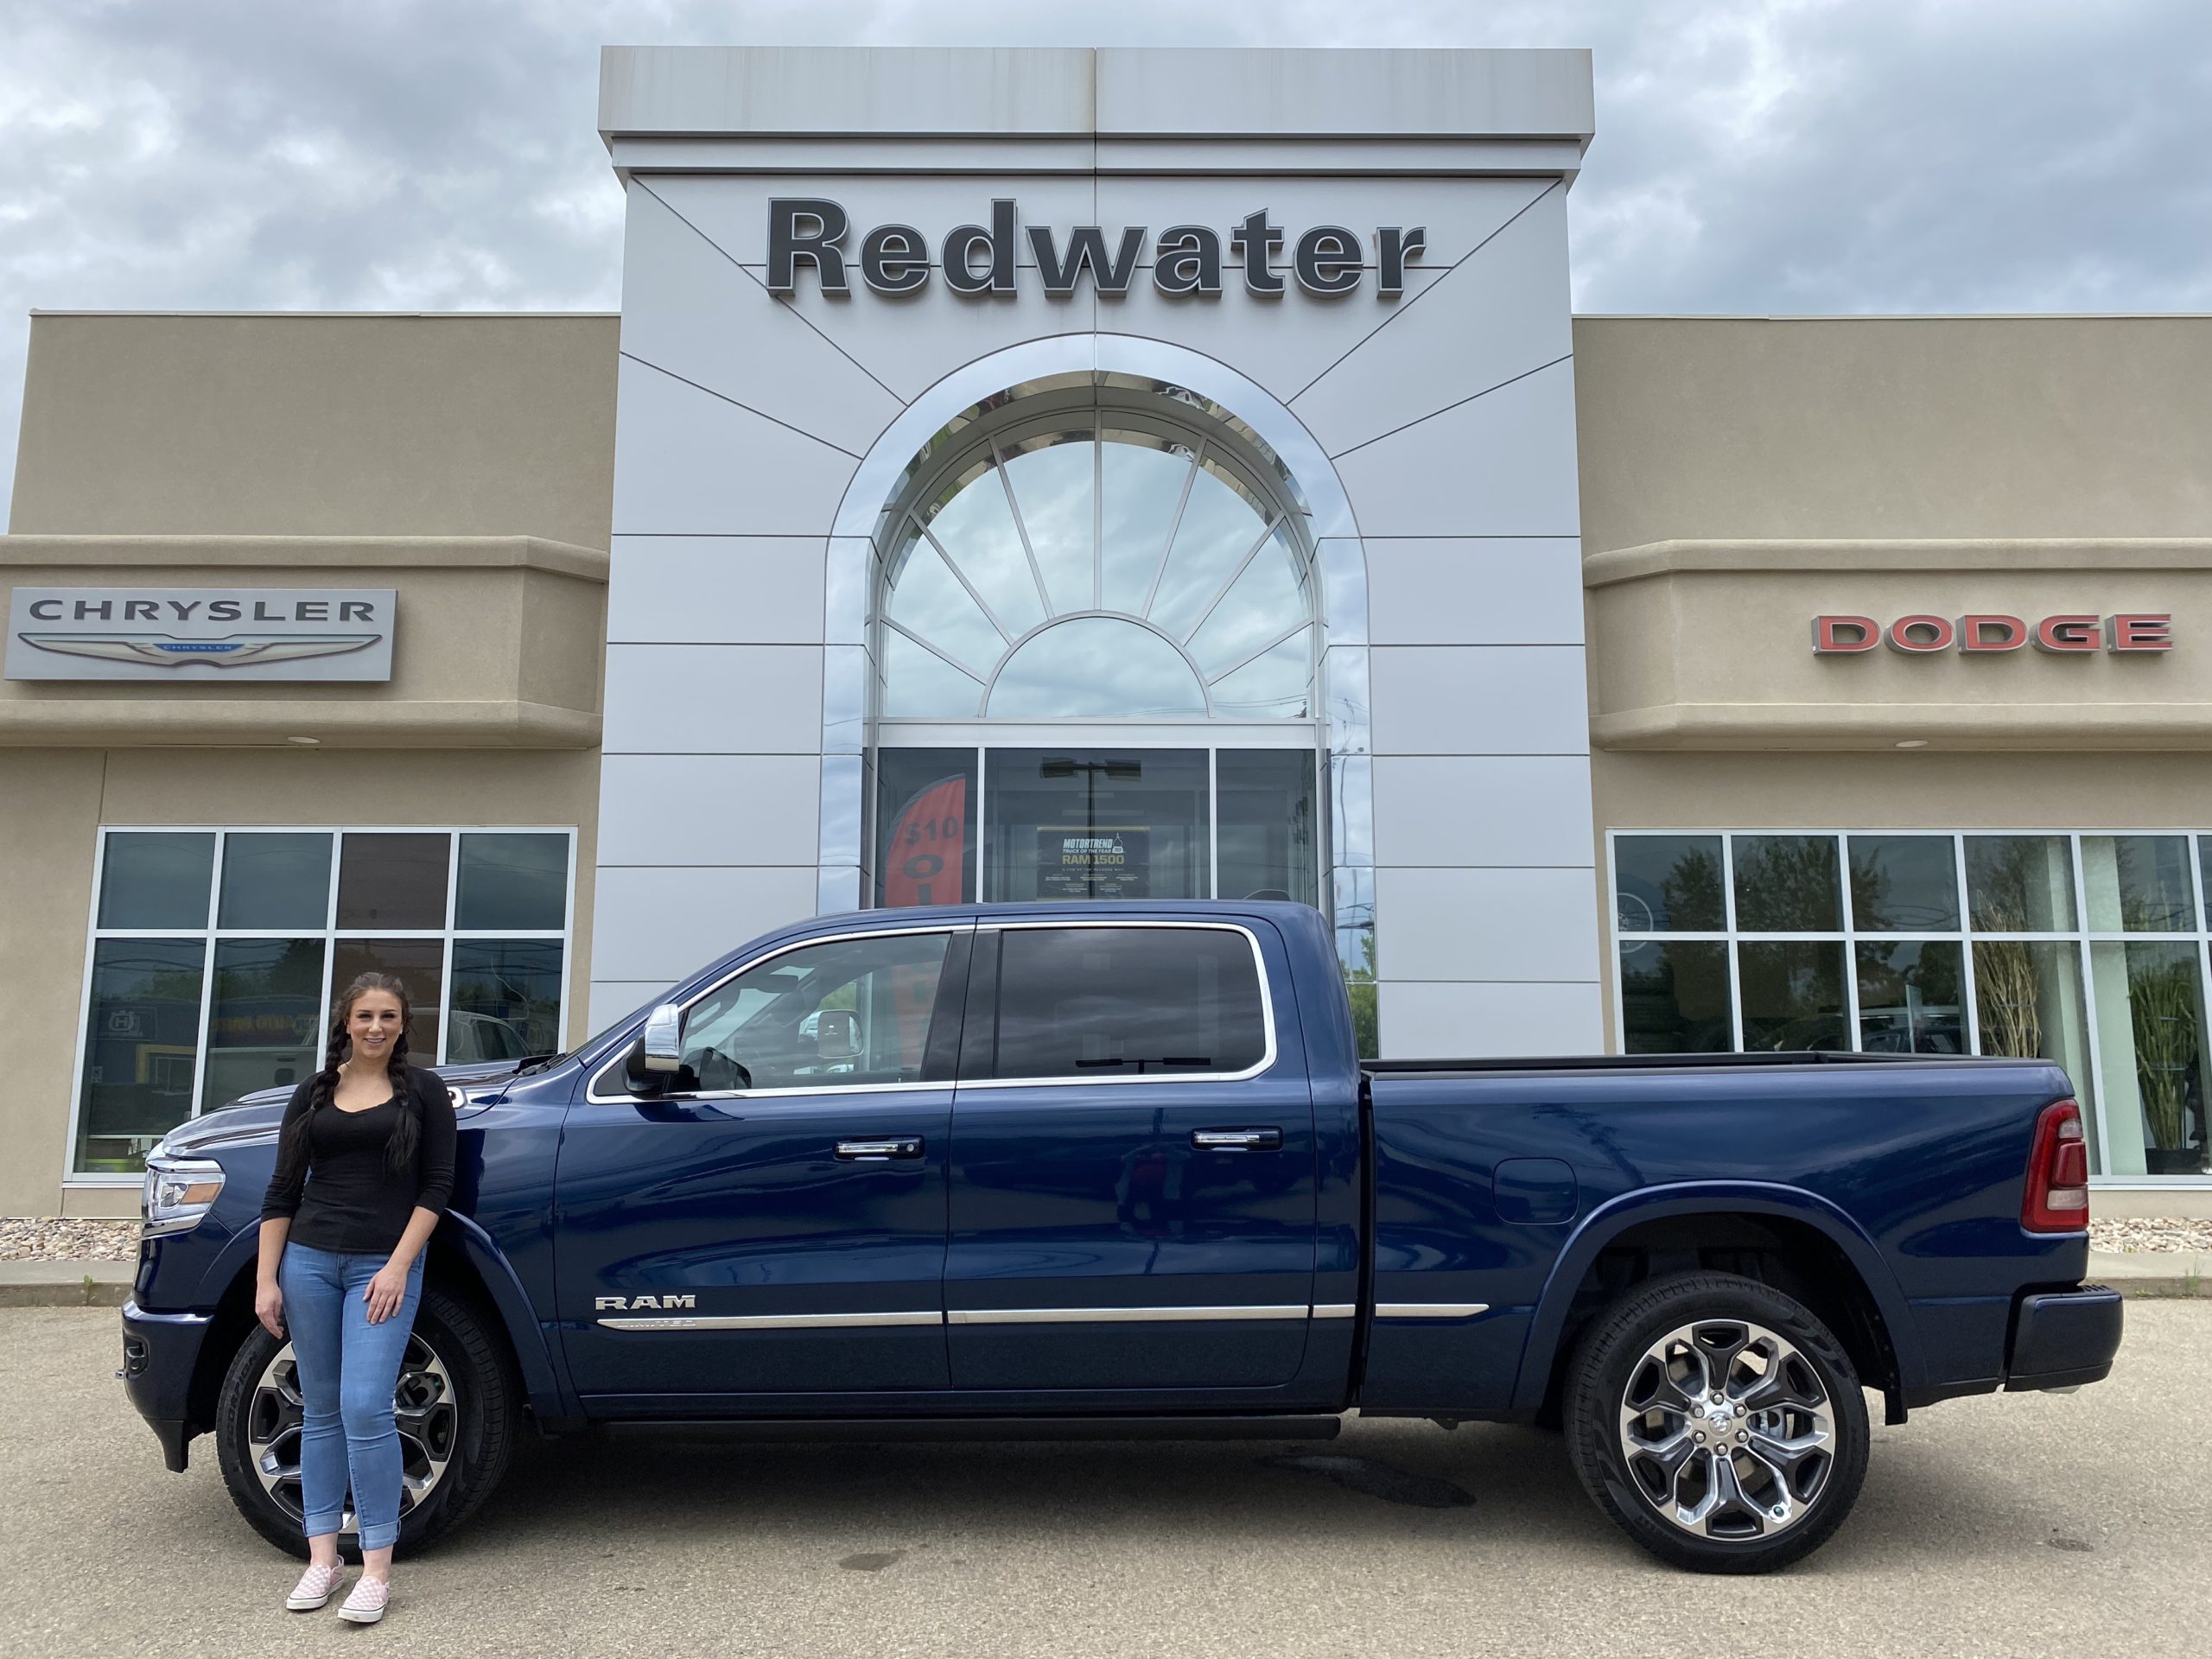 NR11735 2022 Ram 1500 Limited Crew Cab 4x4 Redwater Dodge